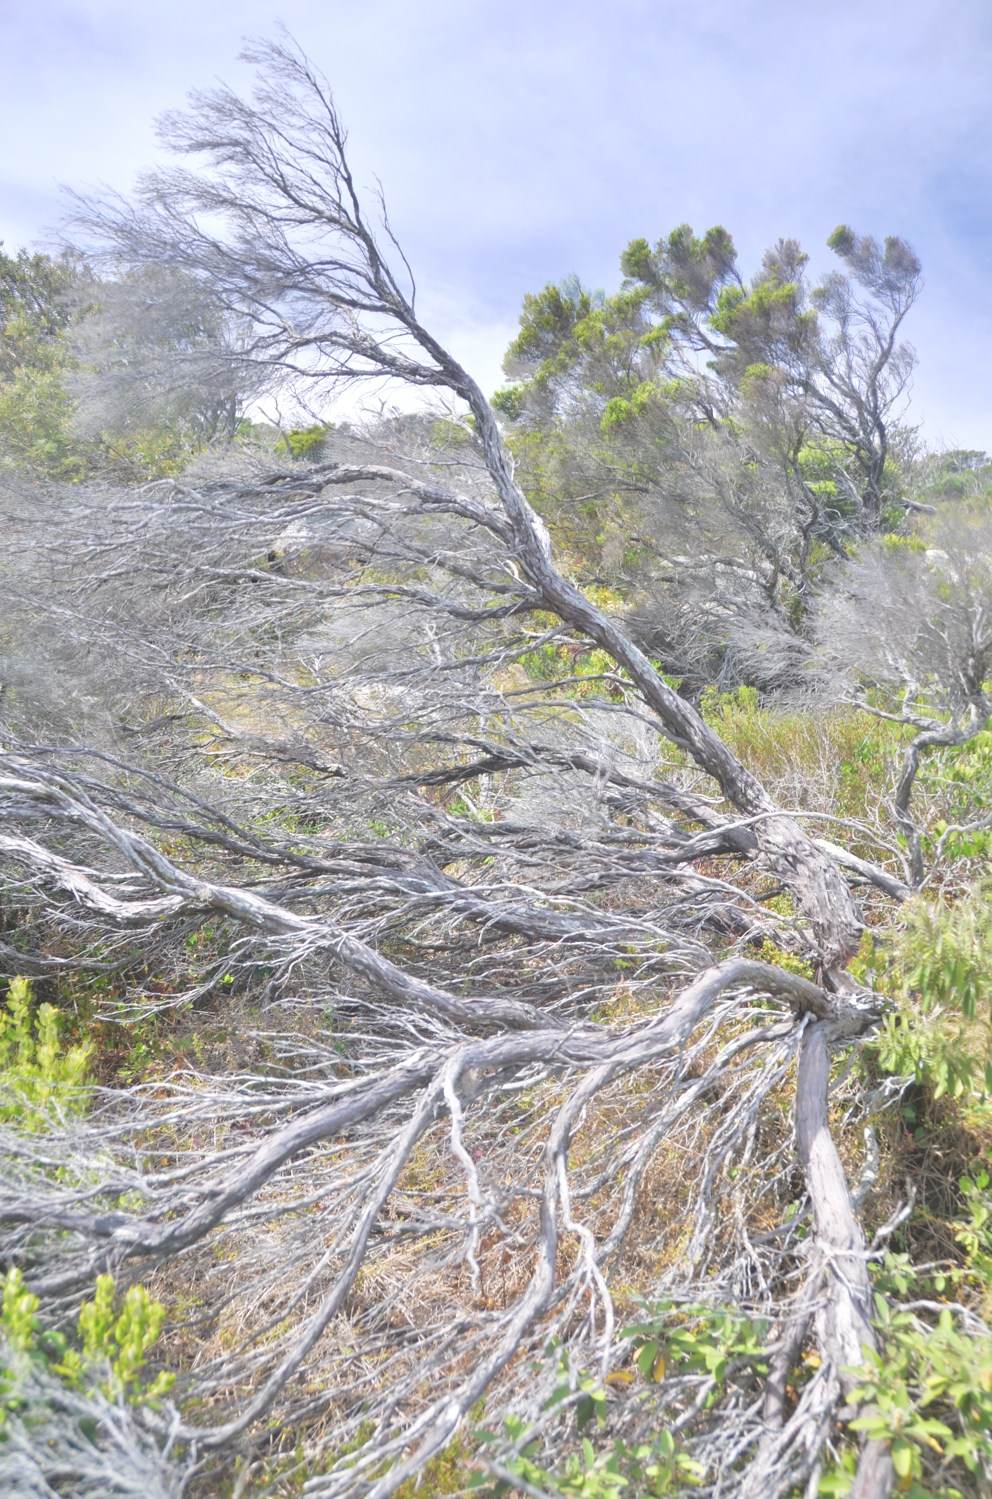 The trees and shrubs near the Cape of Good Hope bear the scars of high winds, which are often gale-forced